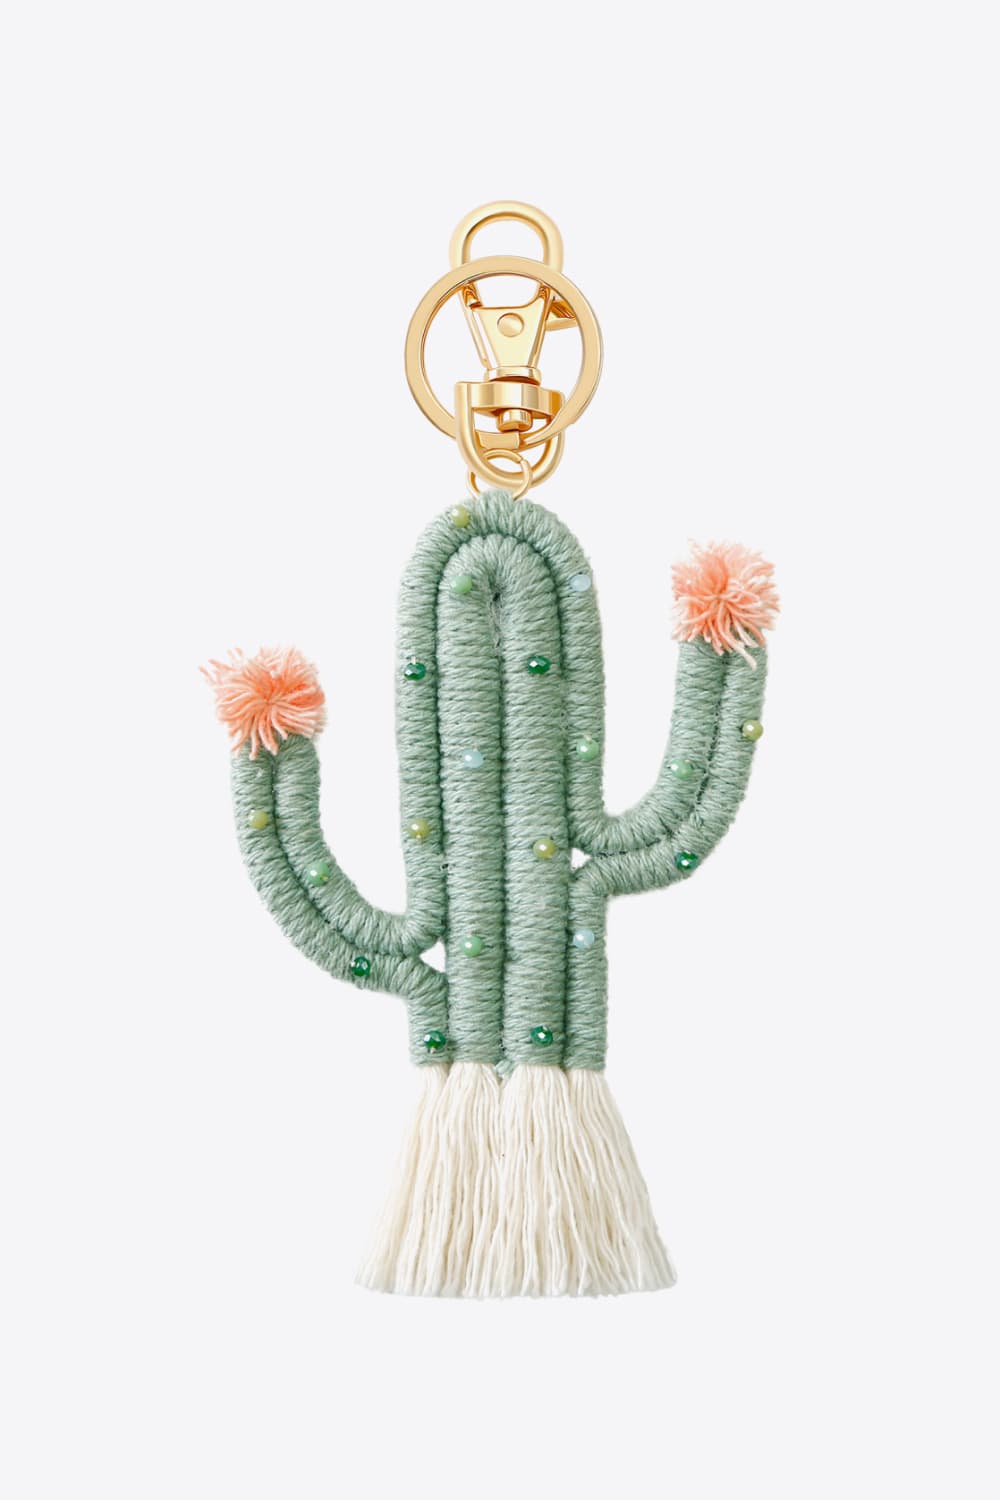 Trendsi Cupid Beauty Supplies Sage / One Size Keychains Bead Trim Cactus Keychain with Fringe